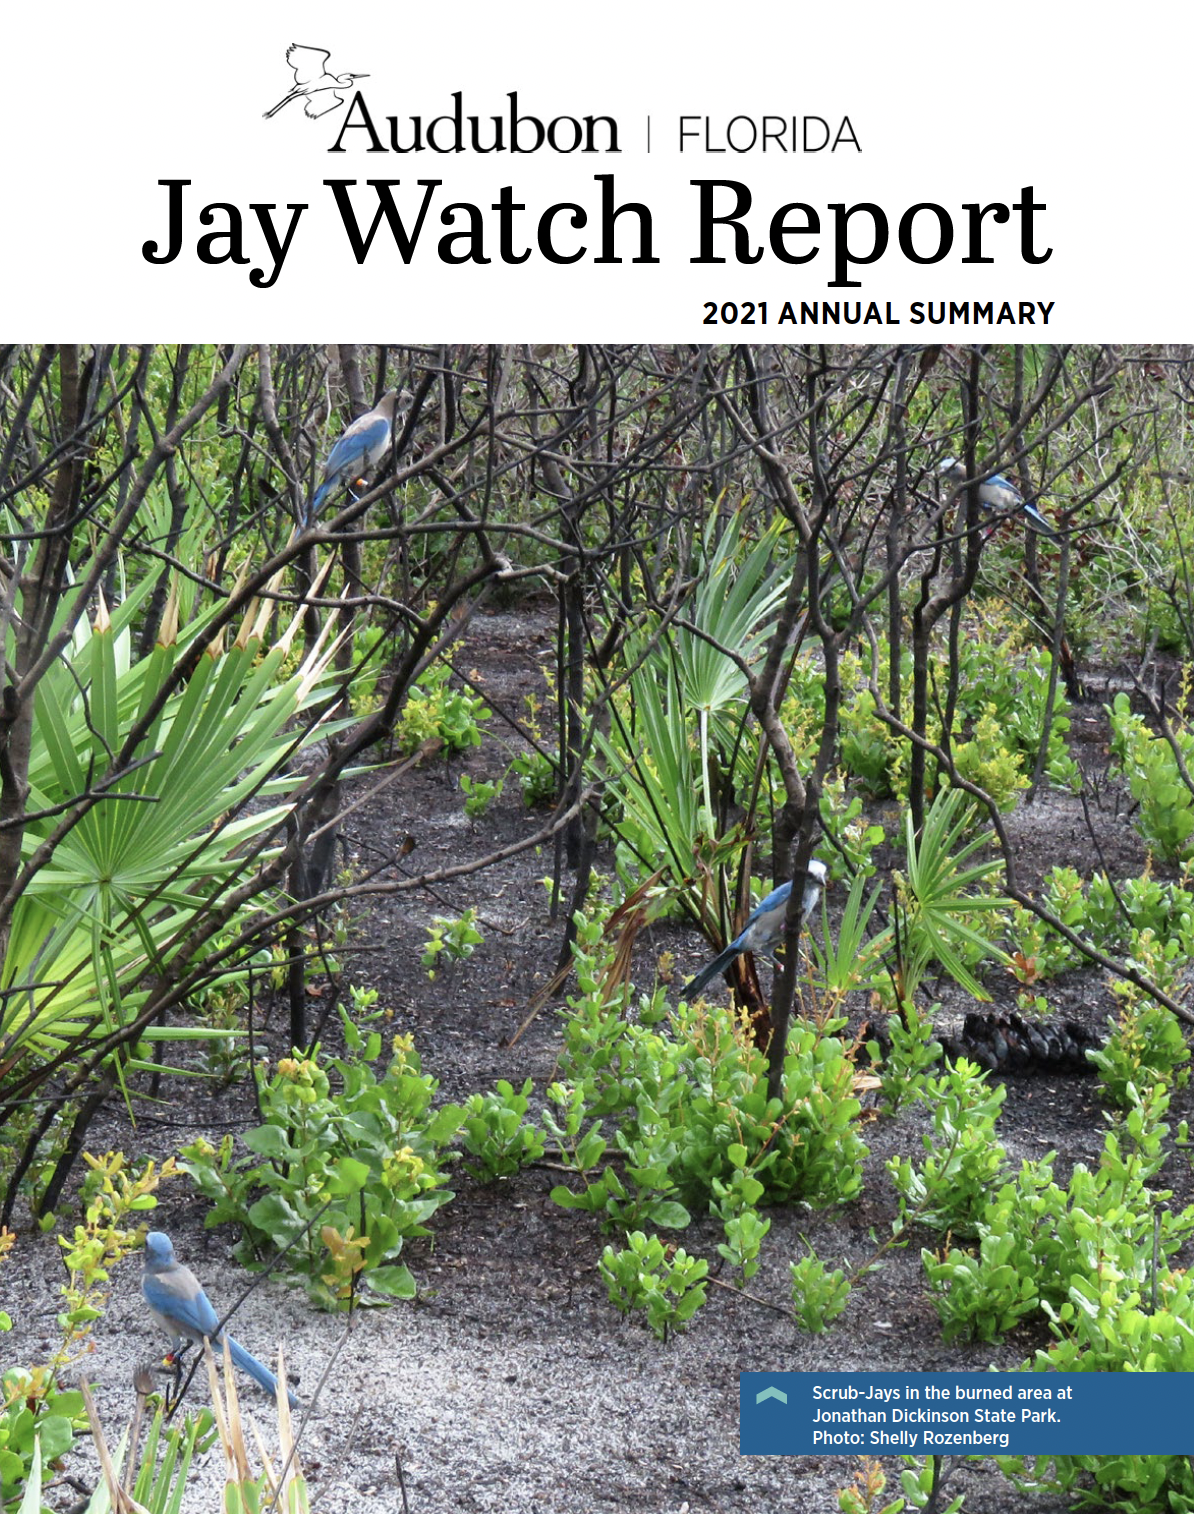 Cover of the 2021 Jay Watch Report. Features Florida Scrub-Jays perched on branches in a recently restored part of Jonathan Dickinson State Park. Bright green plants growing out of dark ground. Photo: Shelly Rozenberg.